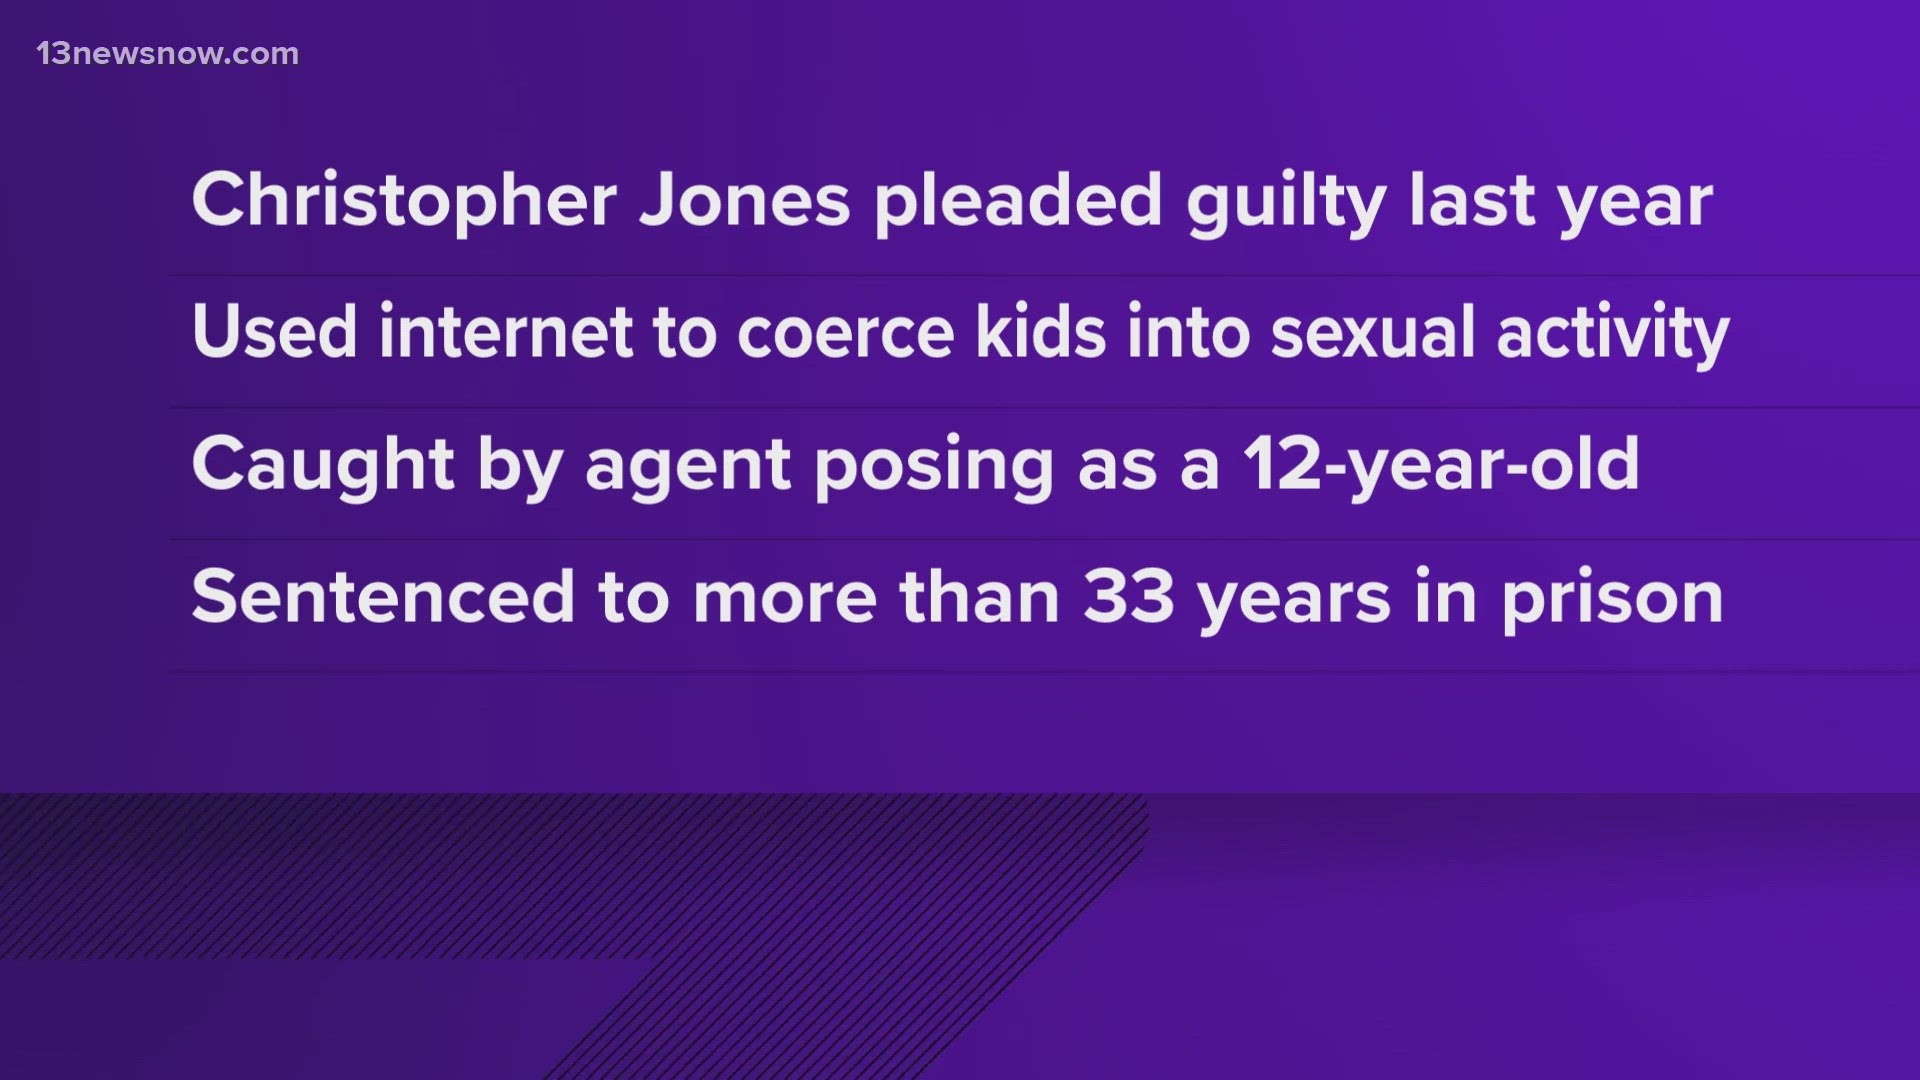 According to court documents, in February of 2022, Christopher Scott Jones used the internet to "entice and coerce a minor to engage in sexual activity."